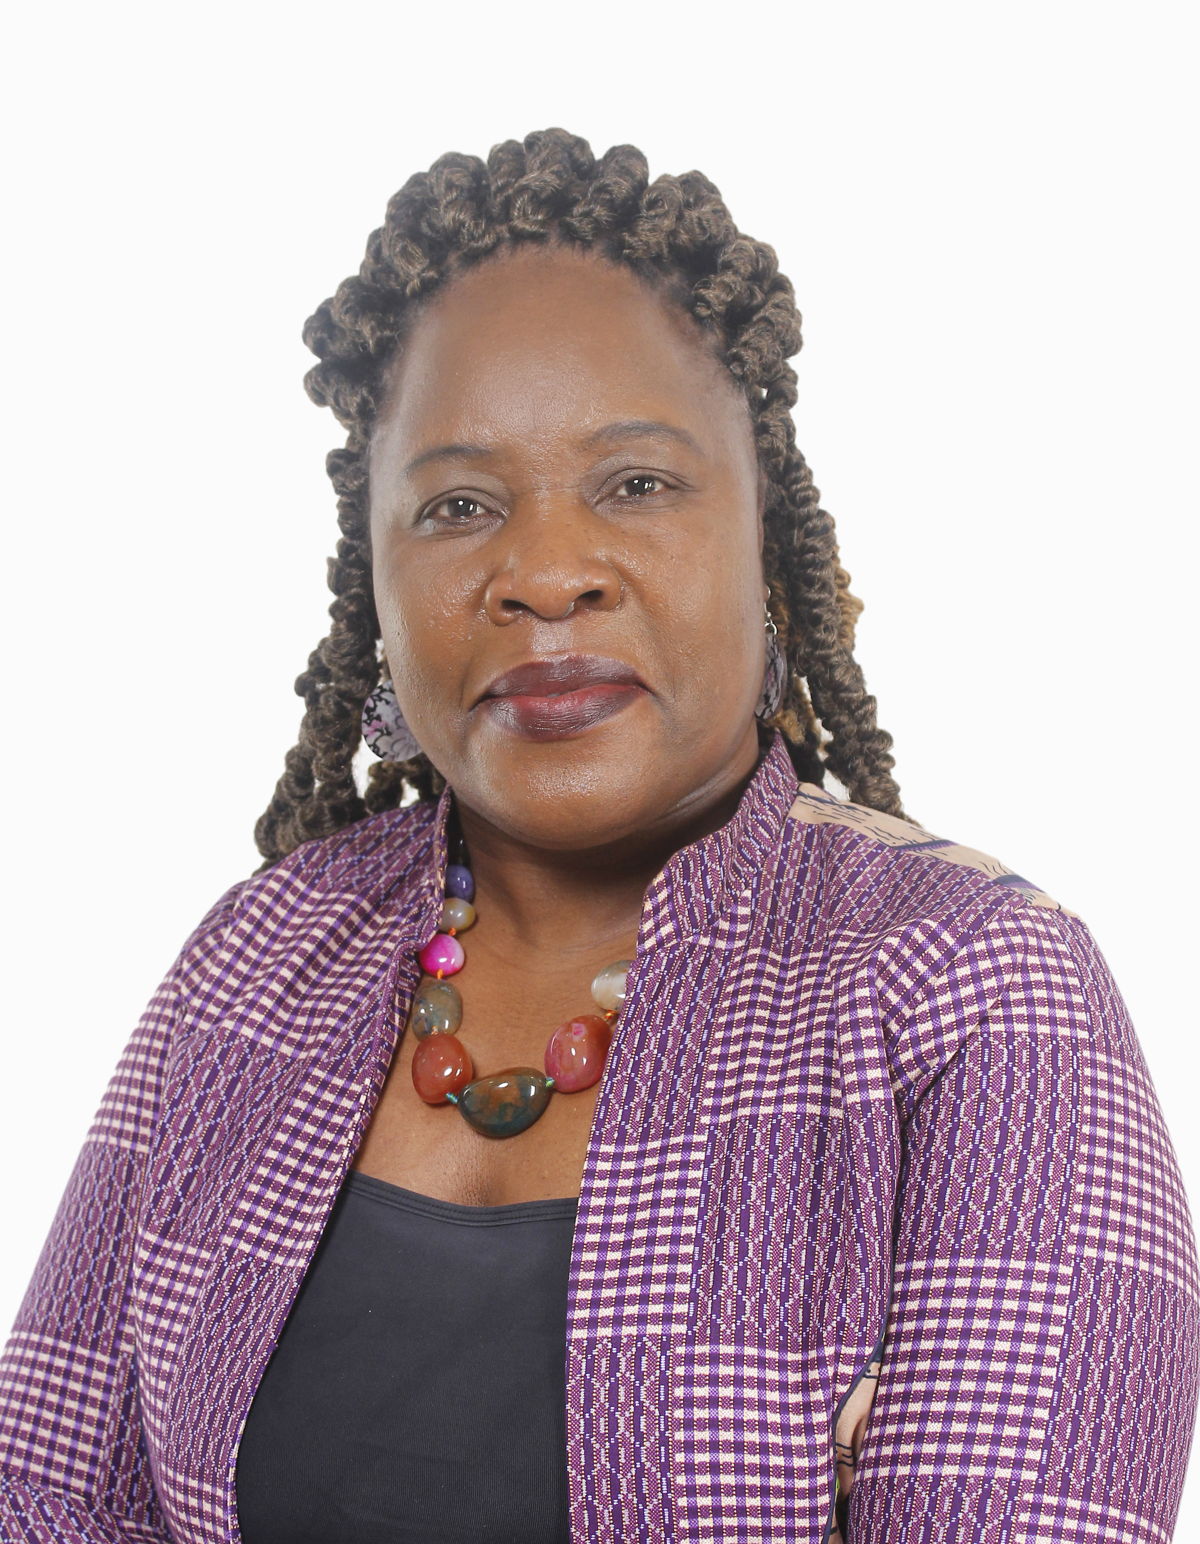 Dr Rebbie Harawa, Regional Director, Eastern and Southern Africa, ICRISAT